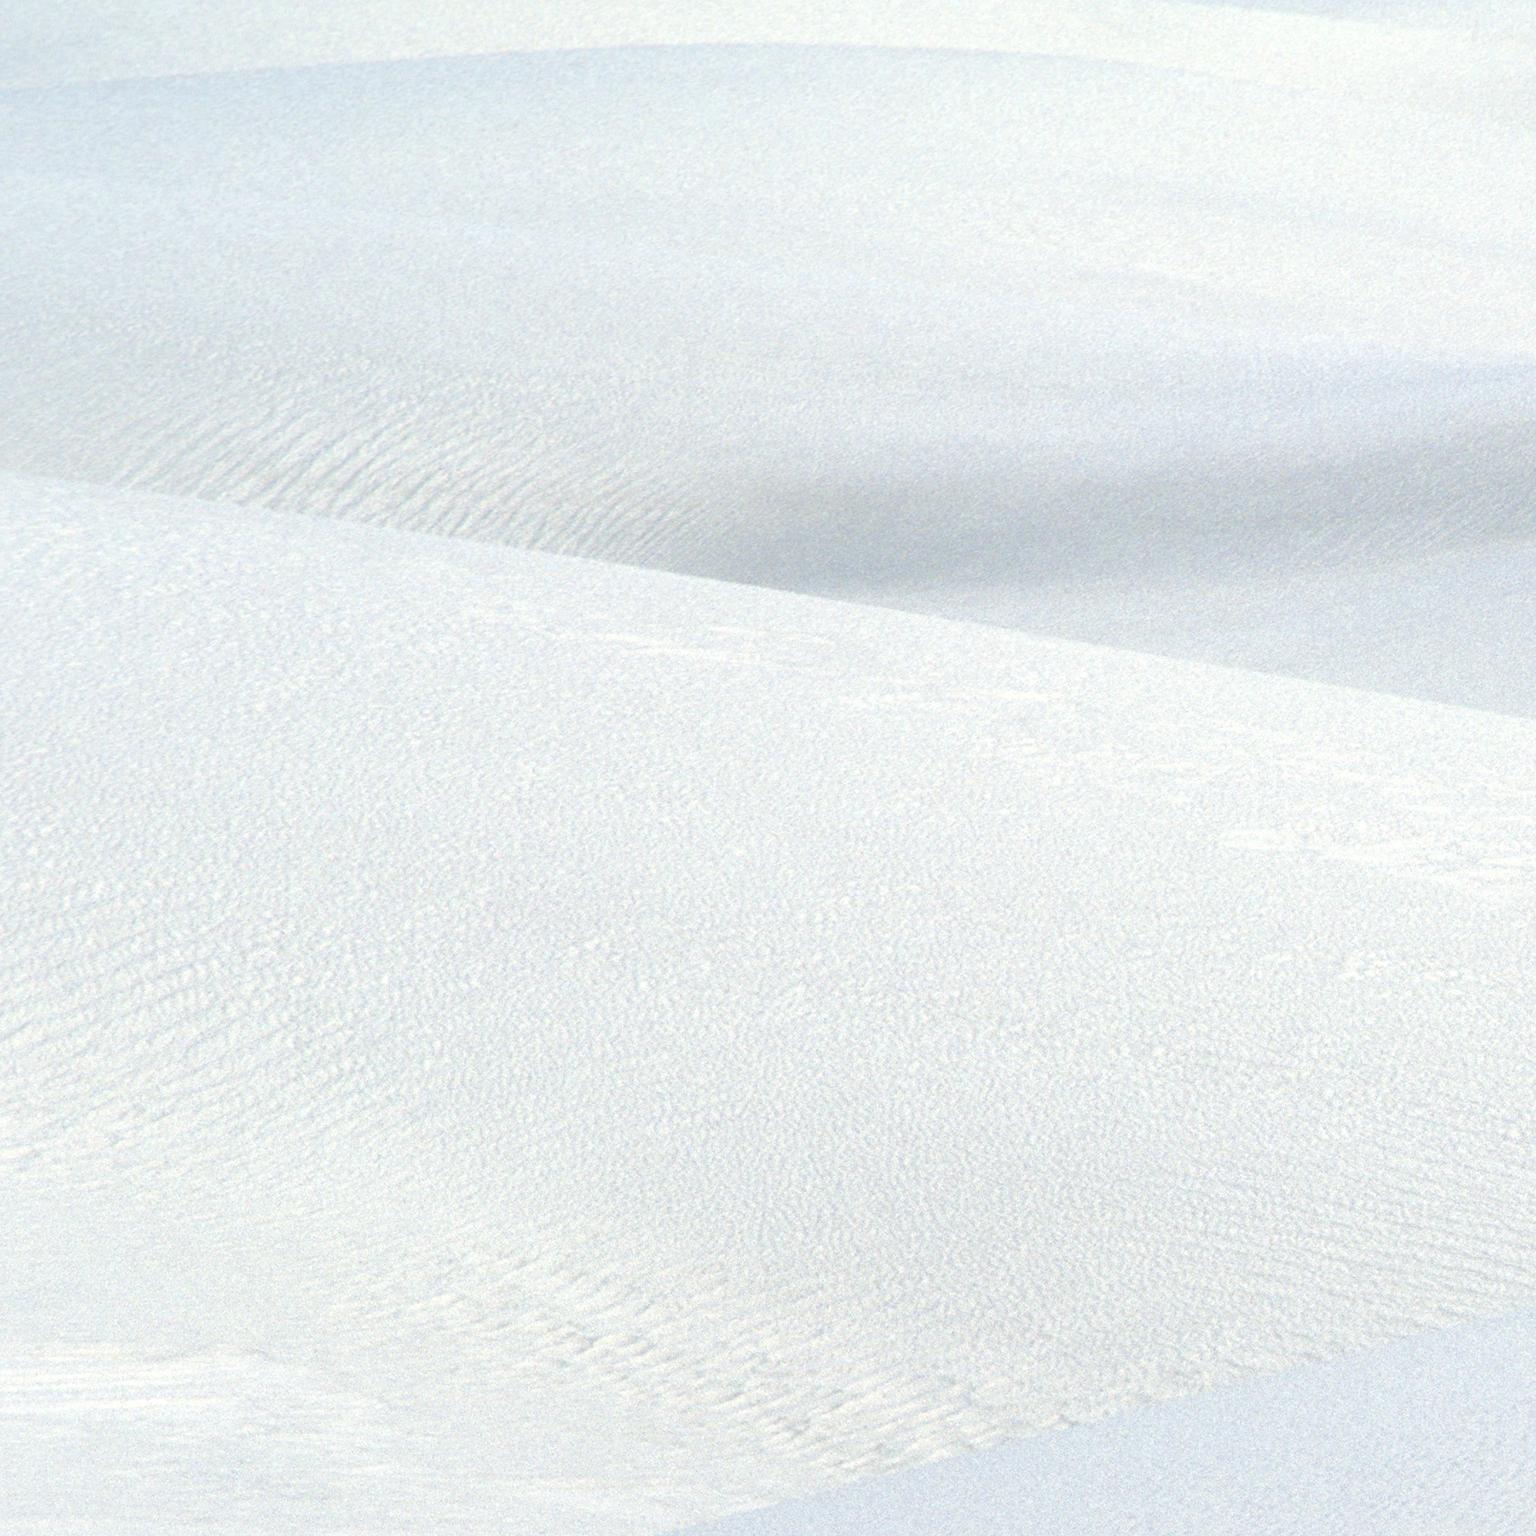 White Sands National Park, USA, 2004, Ver. 2 Like no place on earth, powder white sand dunes, 
Photograph by Cosmo Condina. Sand dunes as abstracts. 
Archival pigment print 19 X 13.8 in. Edition of 10. This is # 3/10 in the edition.

Rising from the